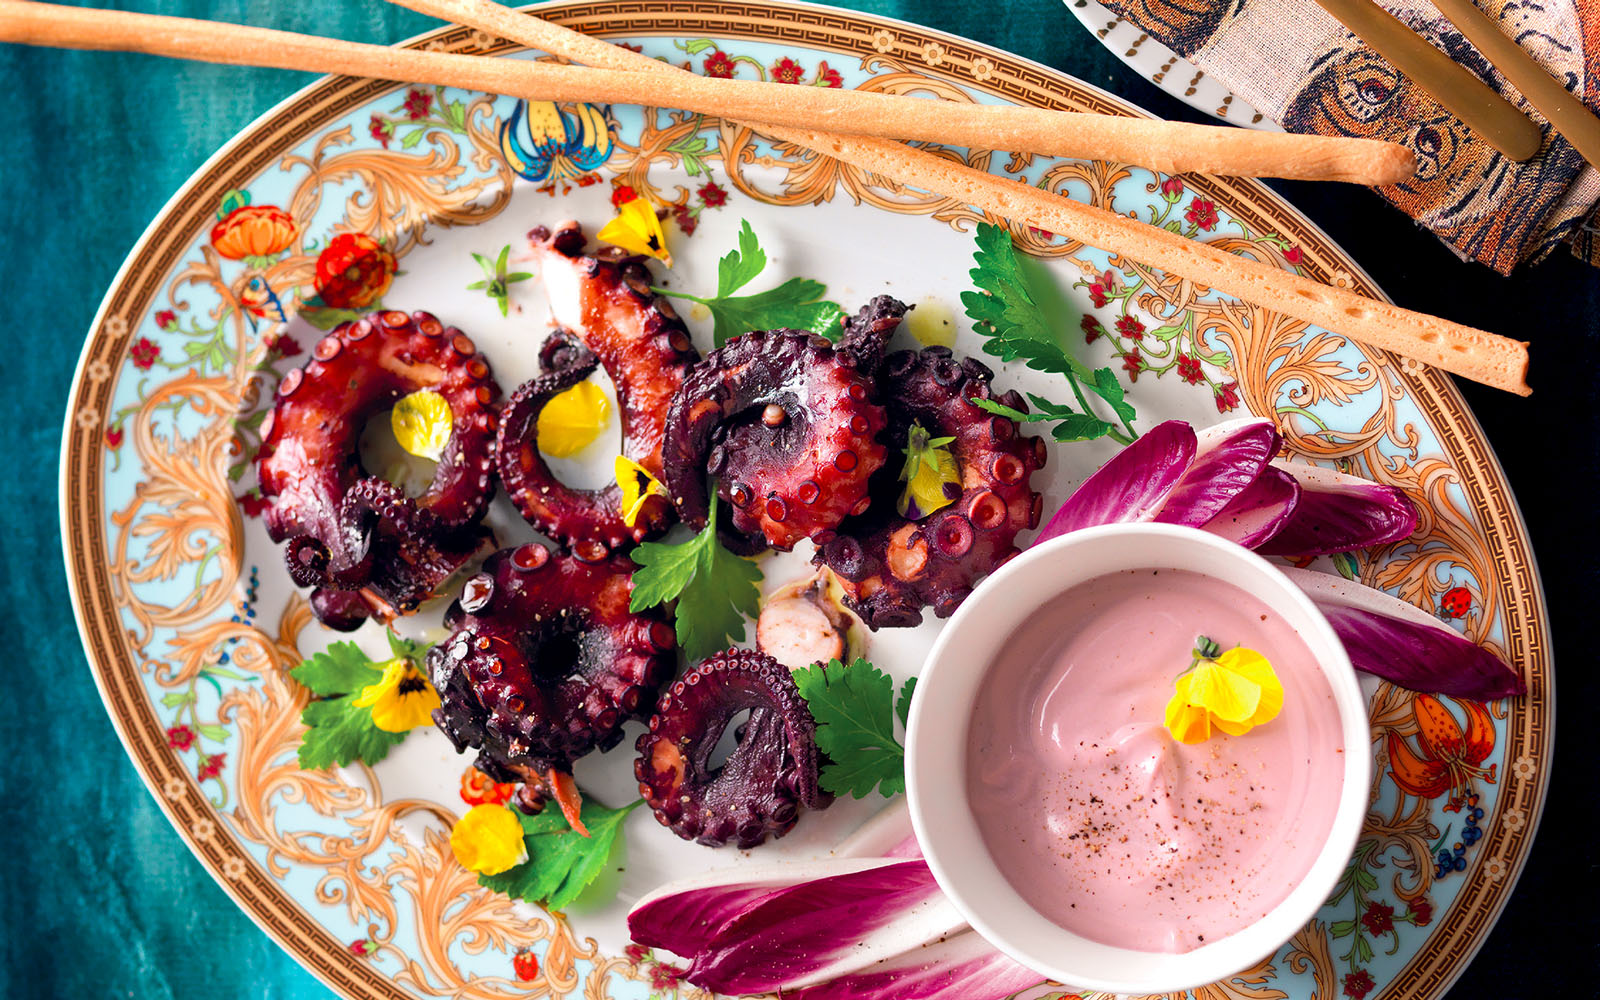 Octopus recipe in red wine with its mayonnaise